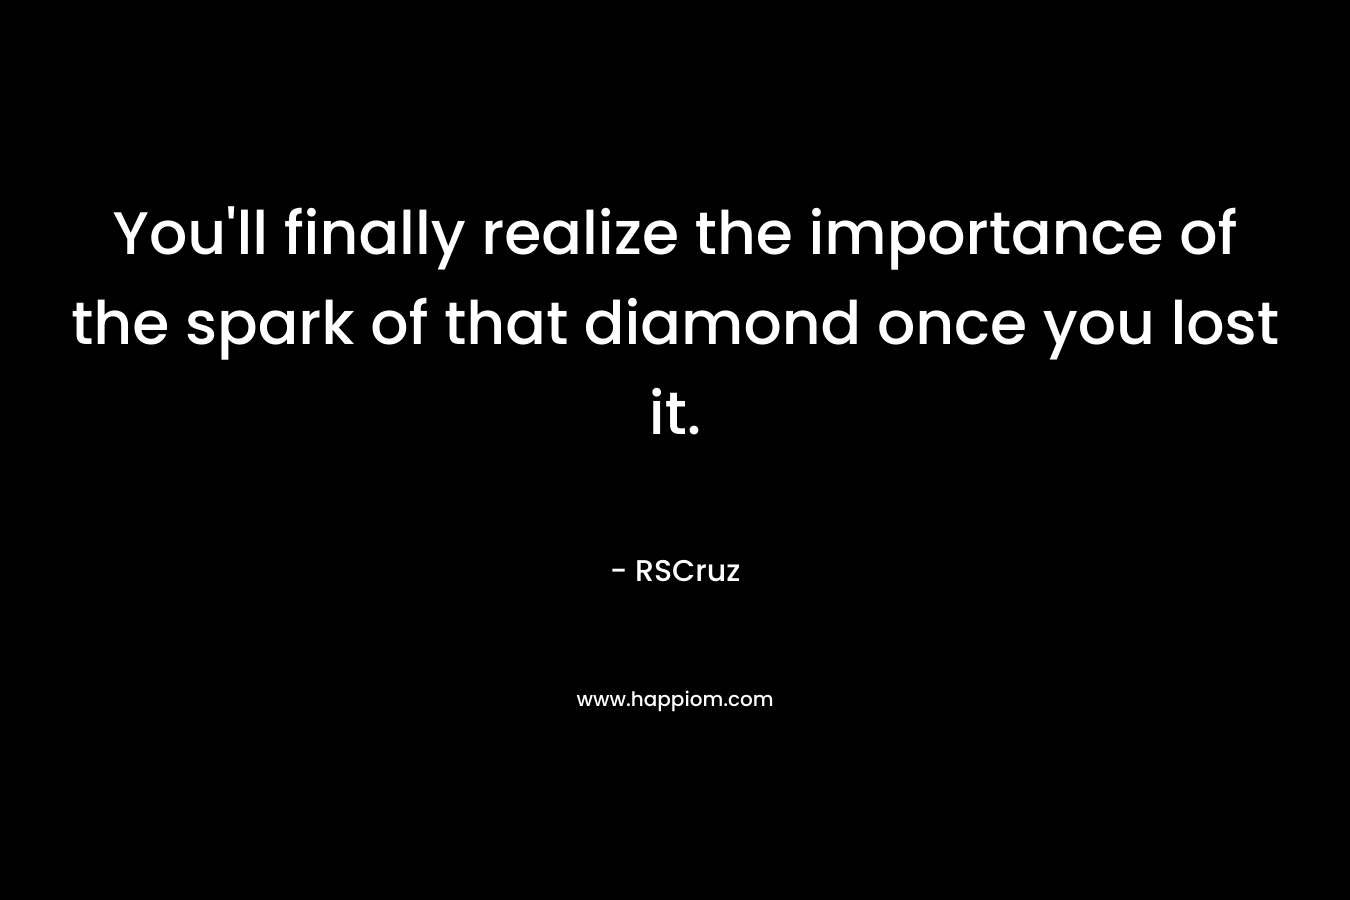 You'll finally realize the importance of the spark of that diamond once you lost it.